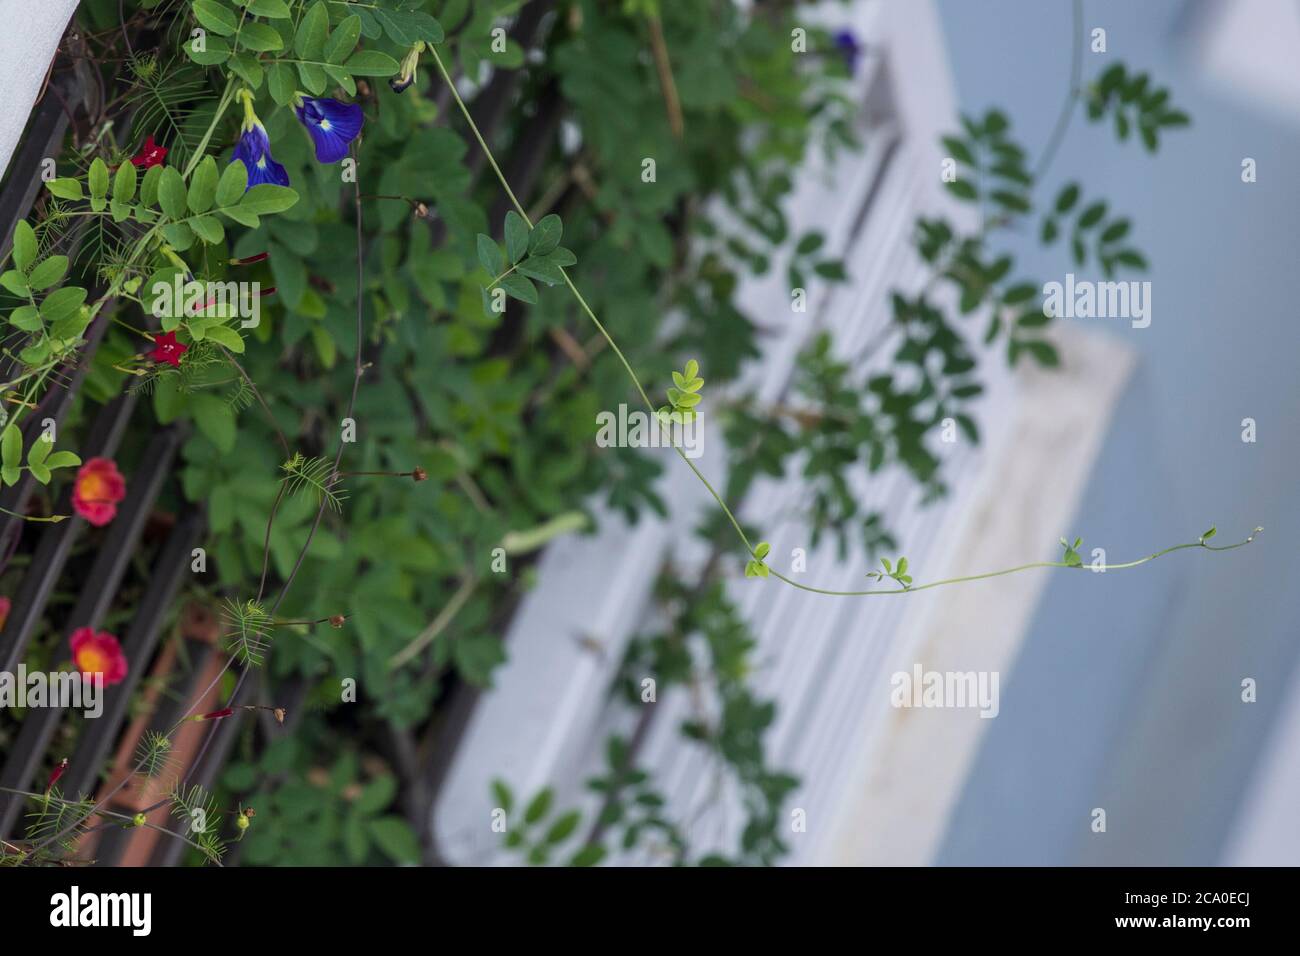 Flowering plant Butterfly pea covered the grills of balcony of a house. Dhaka, Bangladesh Stock Photo